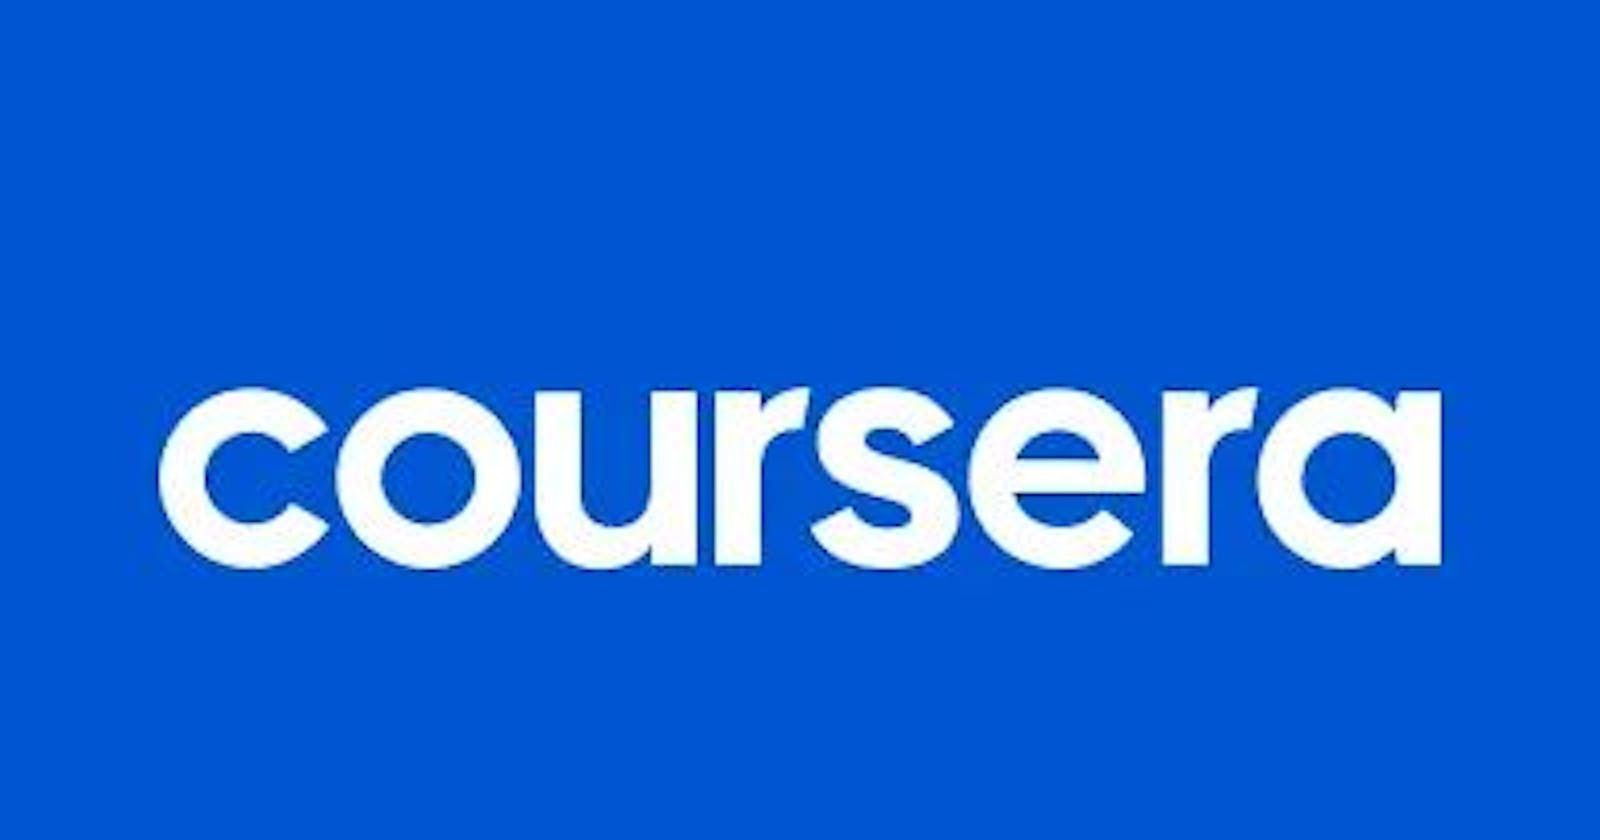 51 Top Courses Coursera Of All Time